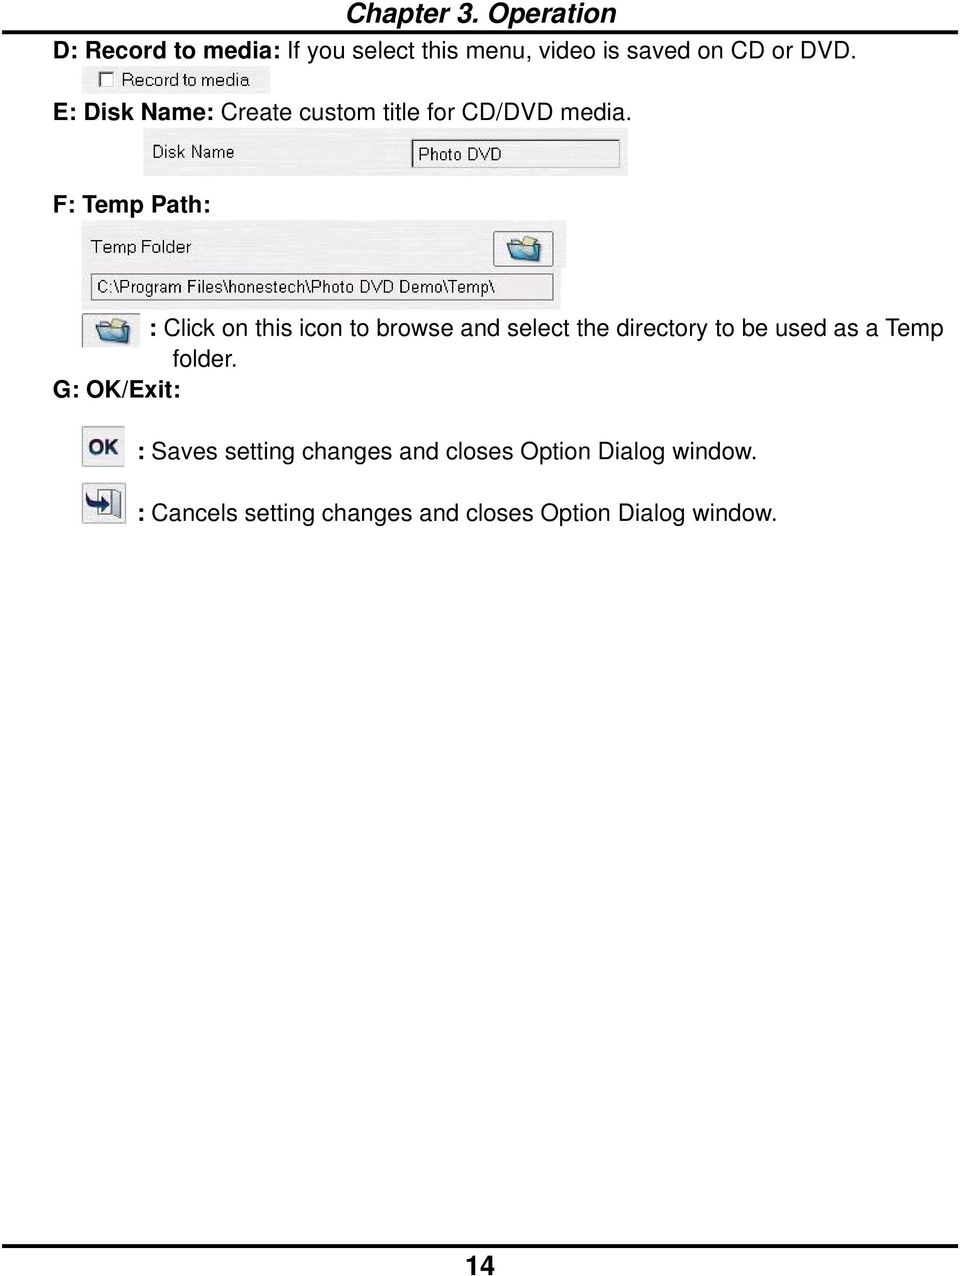 F: Temp Path: : Click on this icon to browse and select the directory to be used as a Temp